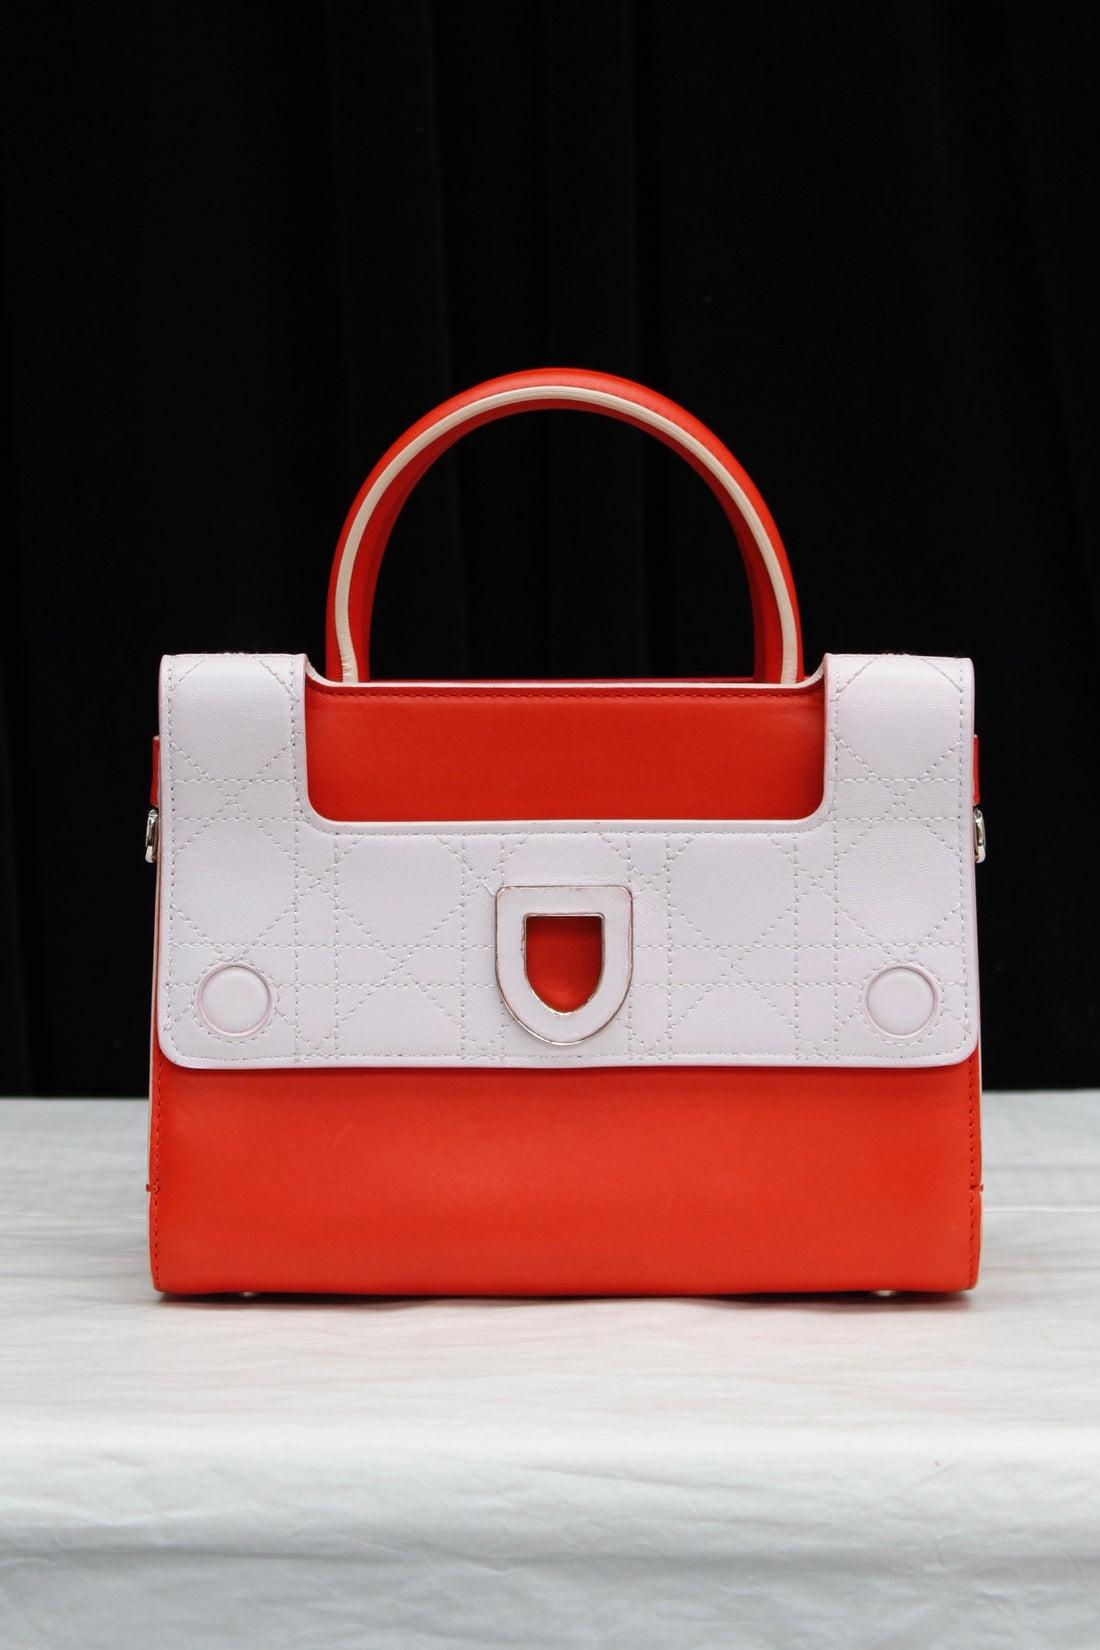 Dior Modern Leather Bag in Orange and White Leather 4